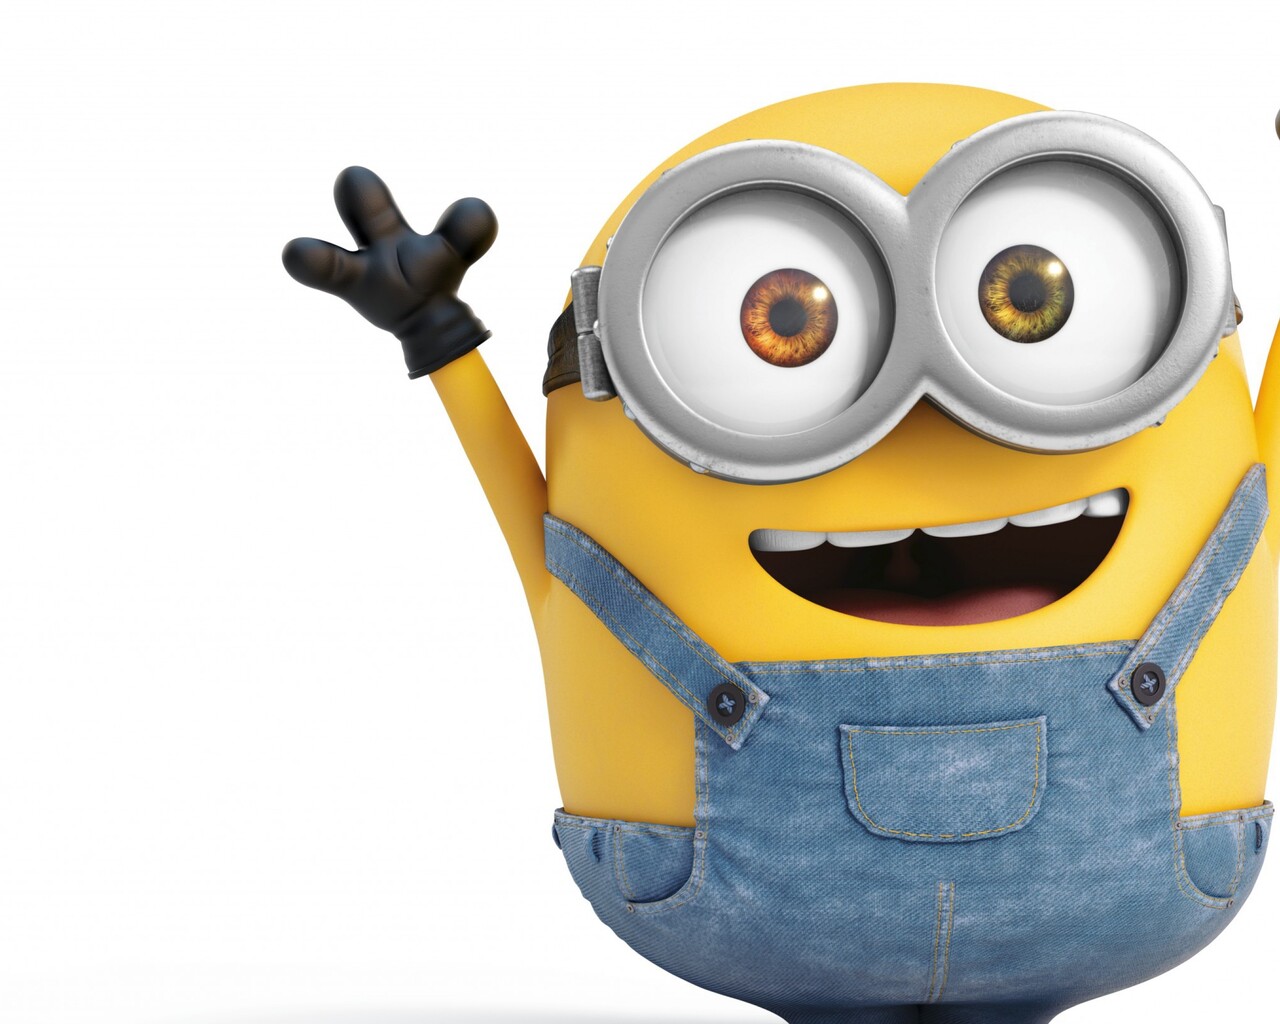 bob the minion wallpapers wallpaper cave on bob the minion wallpapers